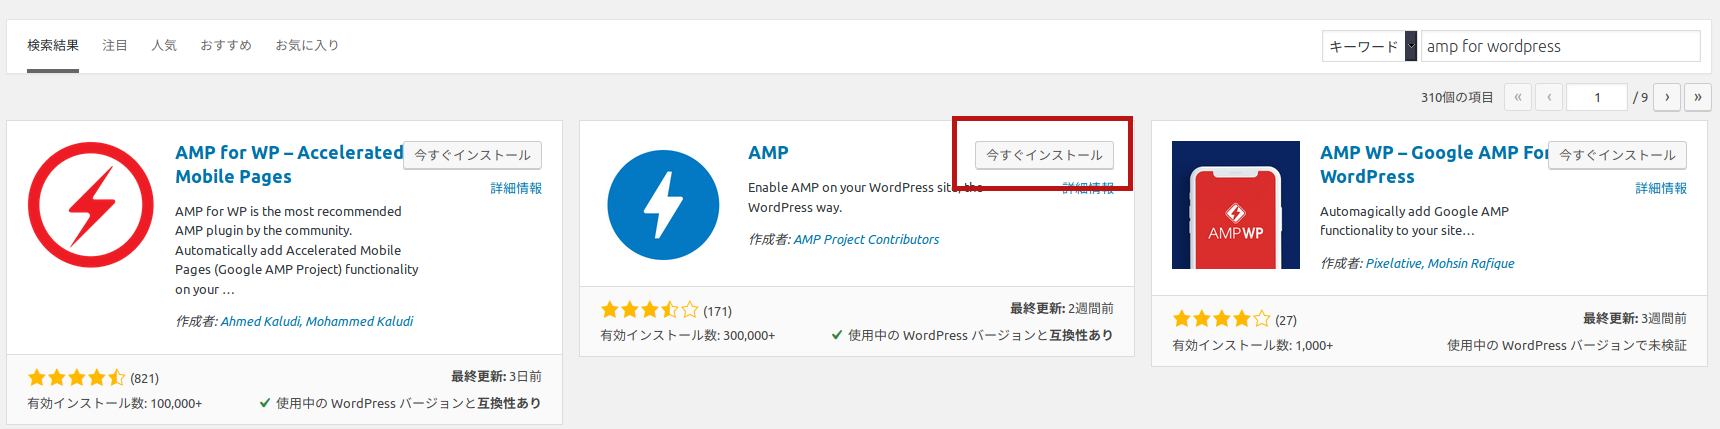 install-official-amp-plugin.png